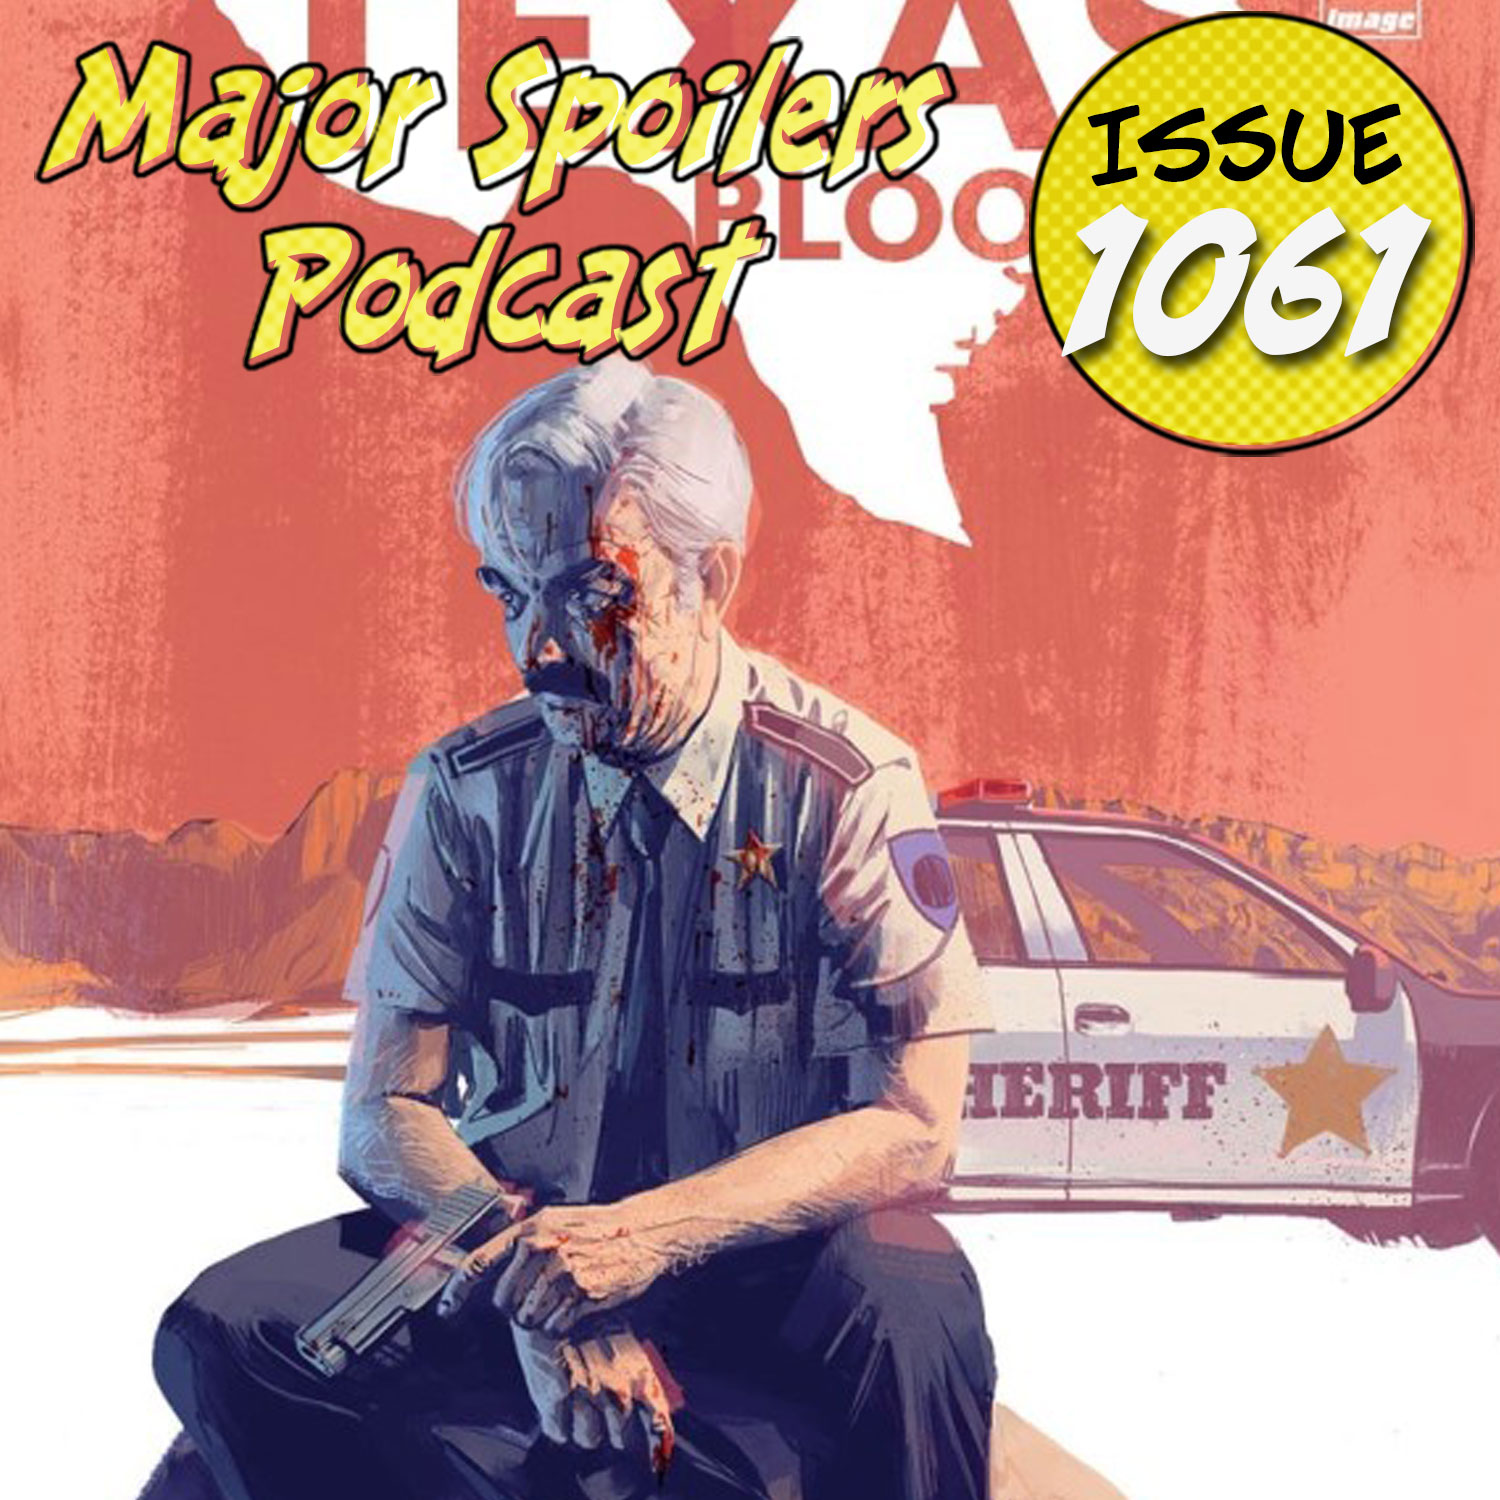 Major Spoilers Podcast #1061: That Texas Podcast